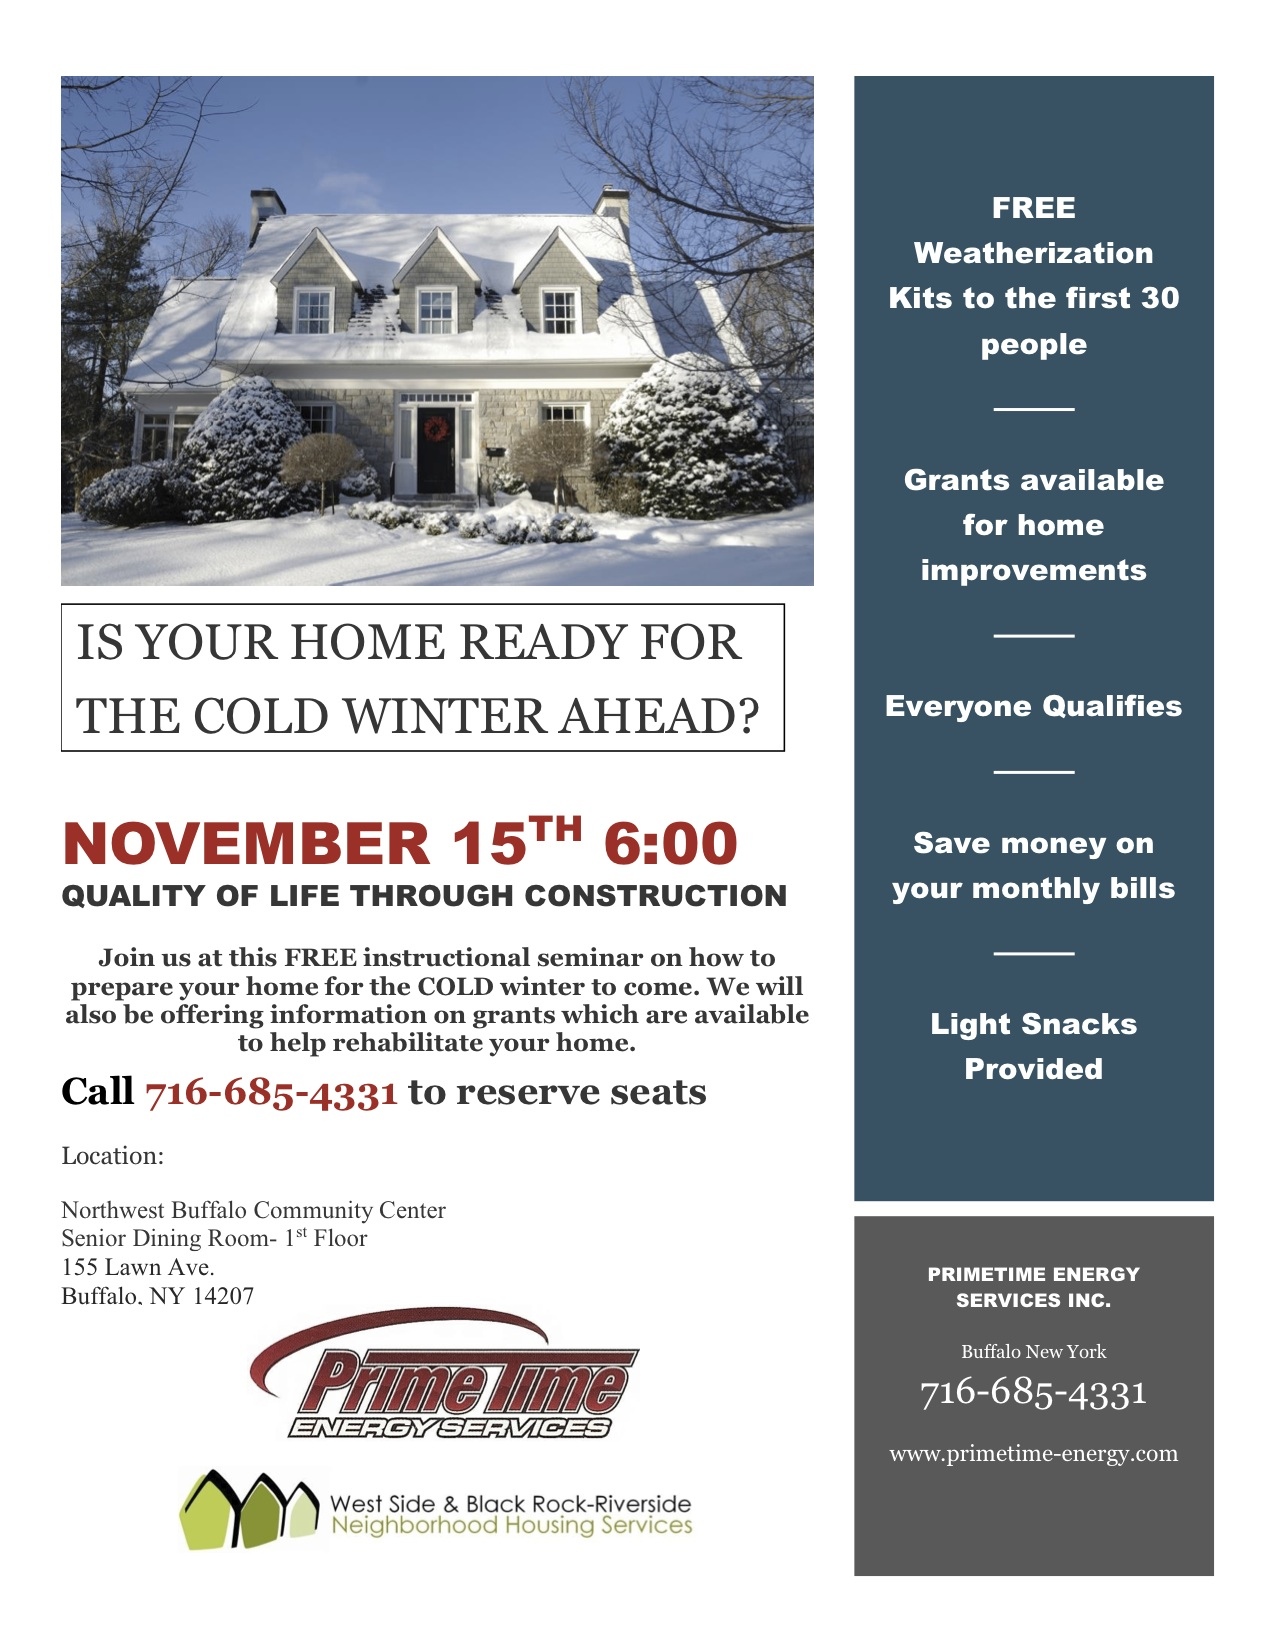 Free seminar to focus on preparing your home for winter’s blast